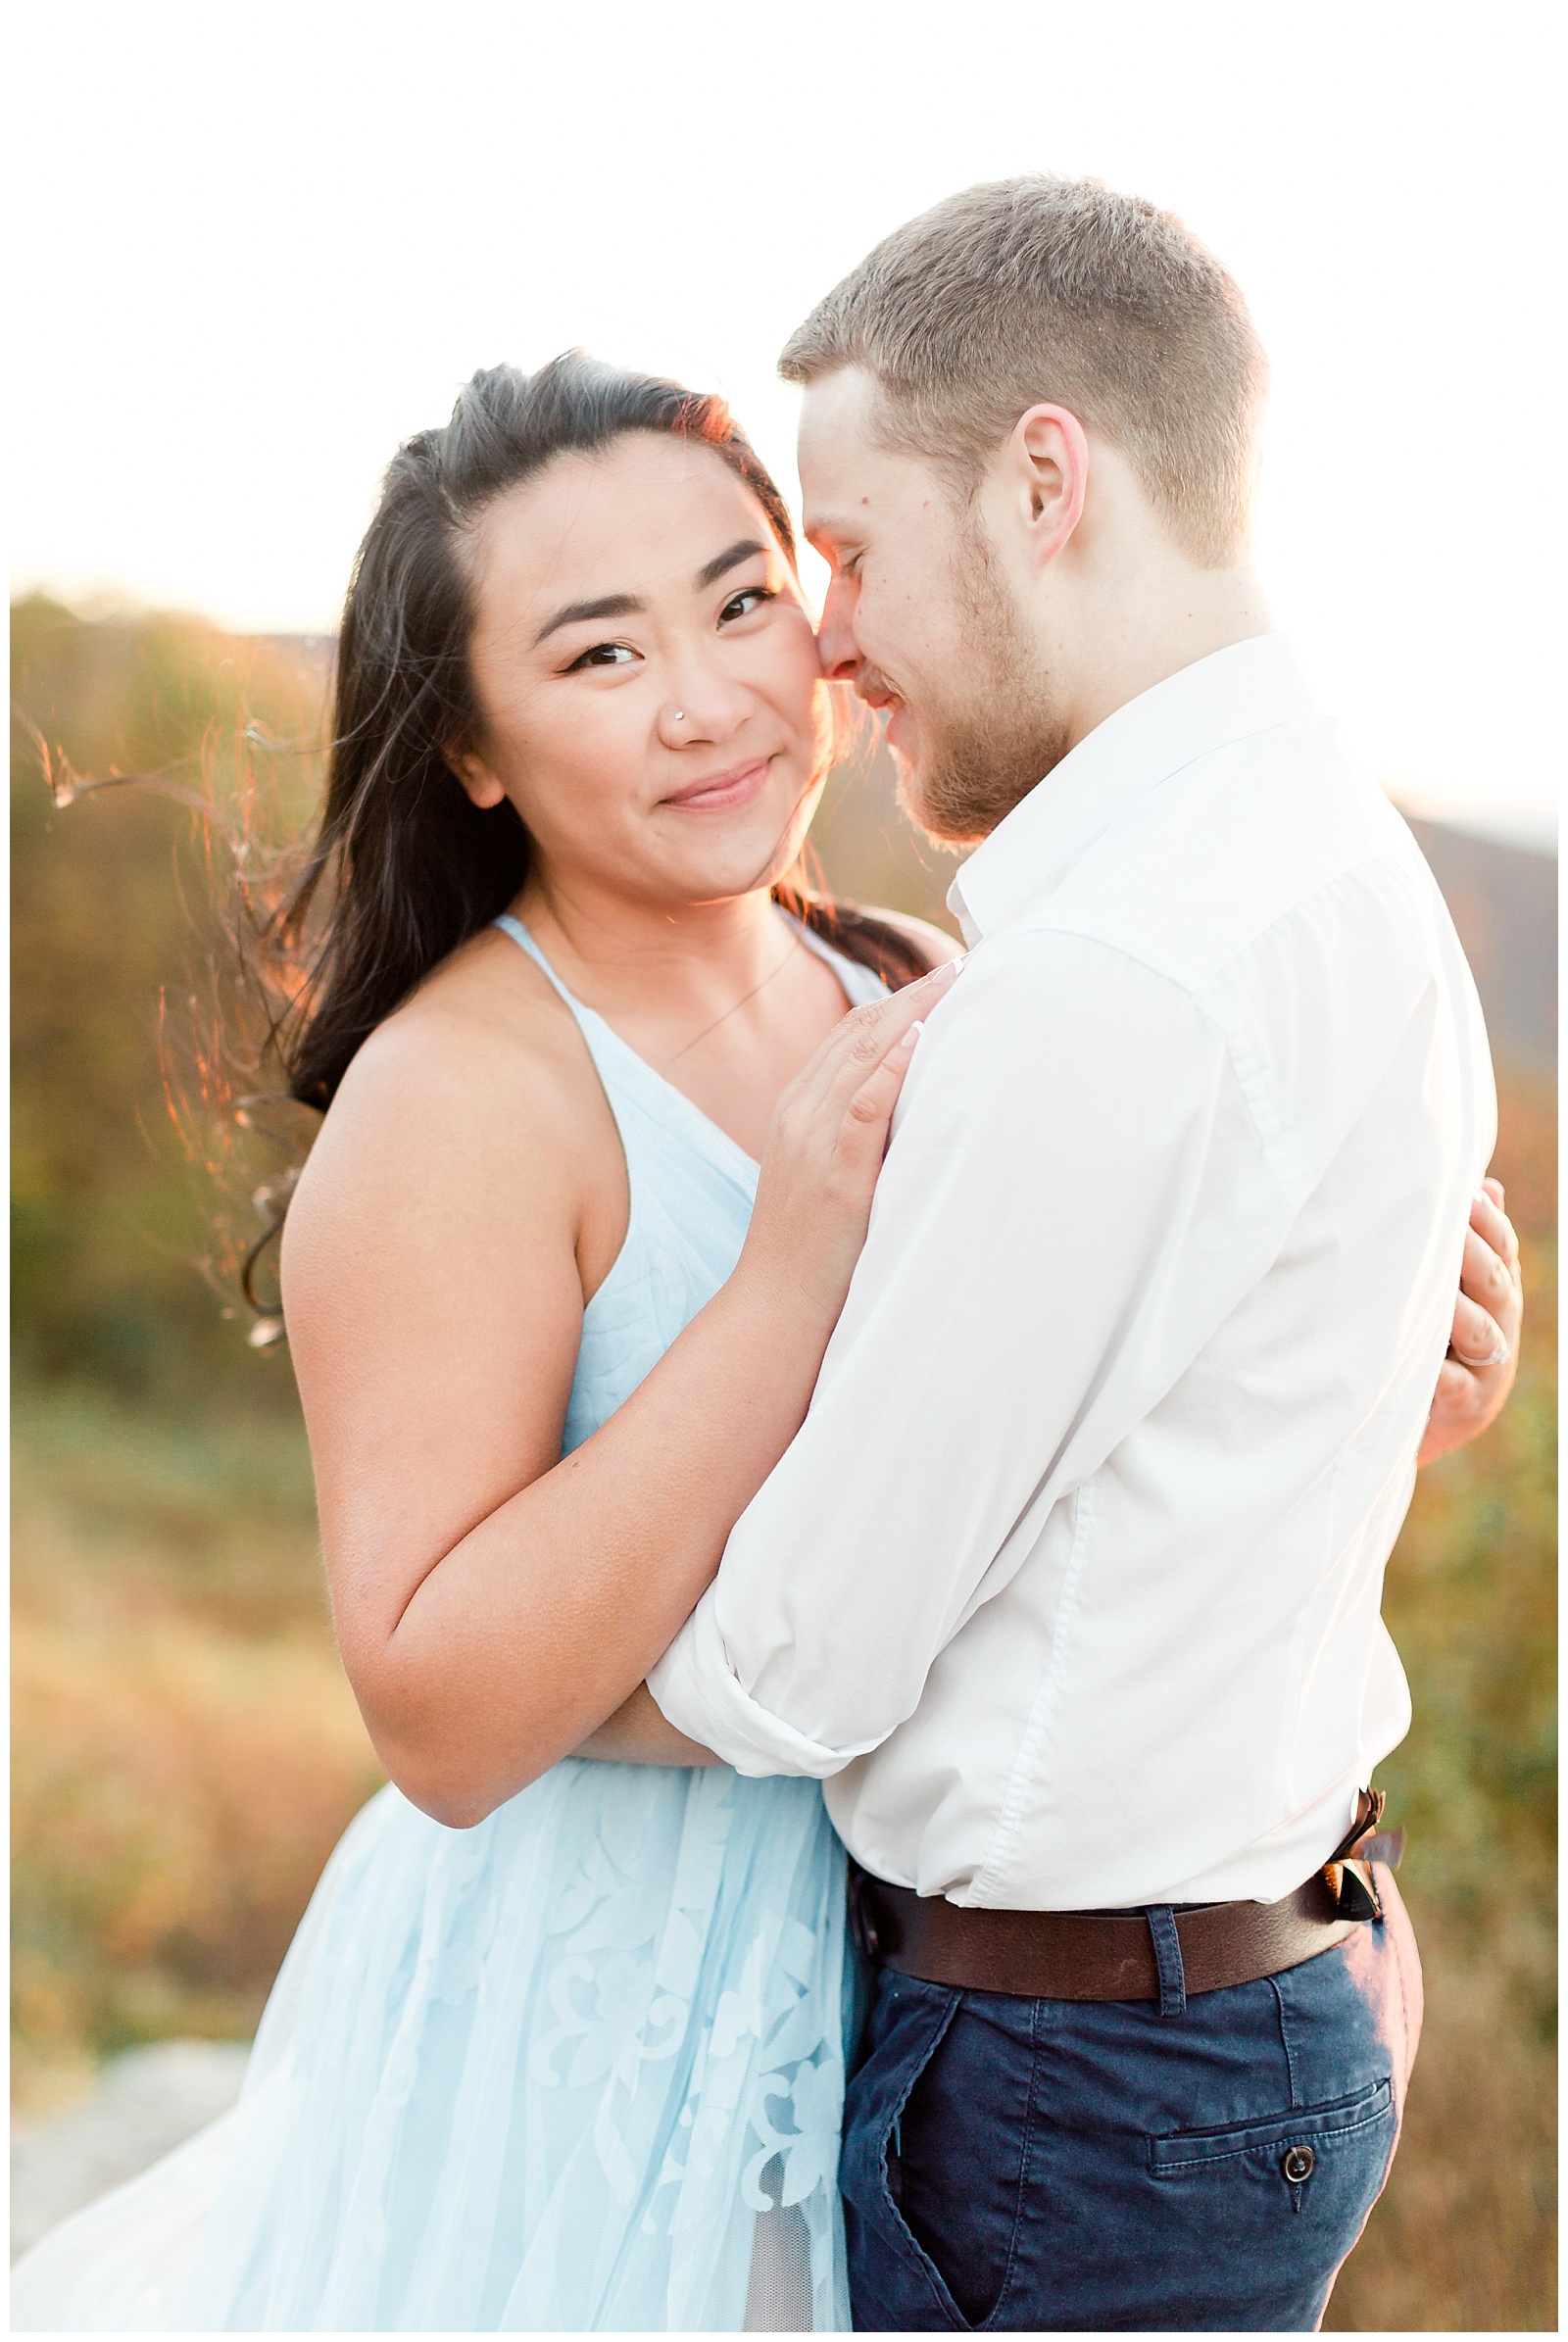 timber-hollow-overlook-engagement-session-82.jpg